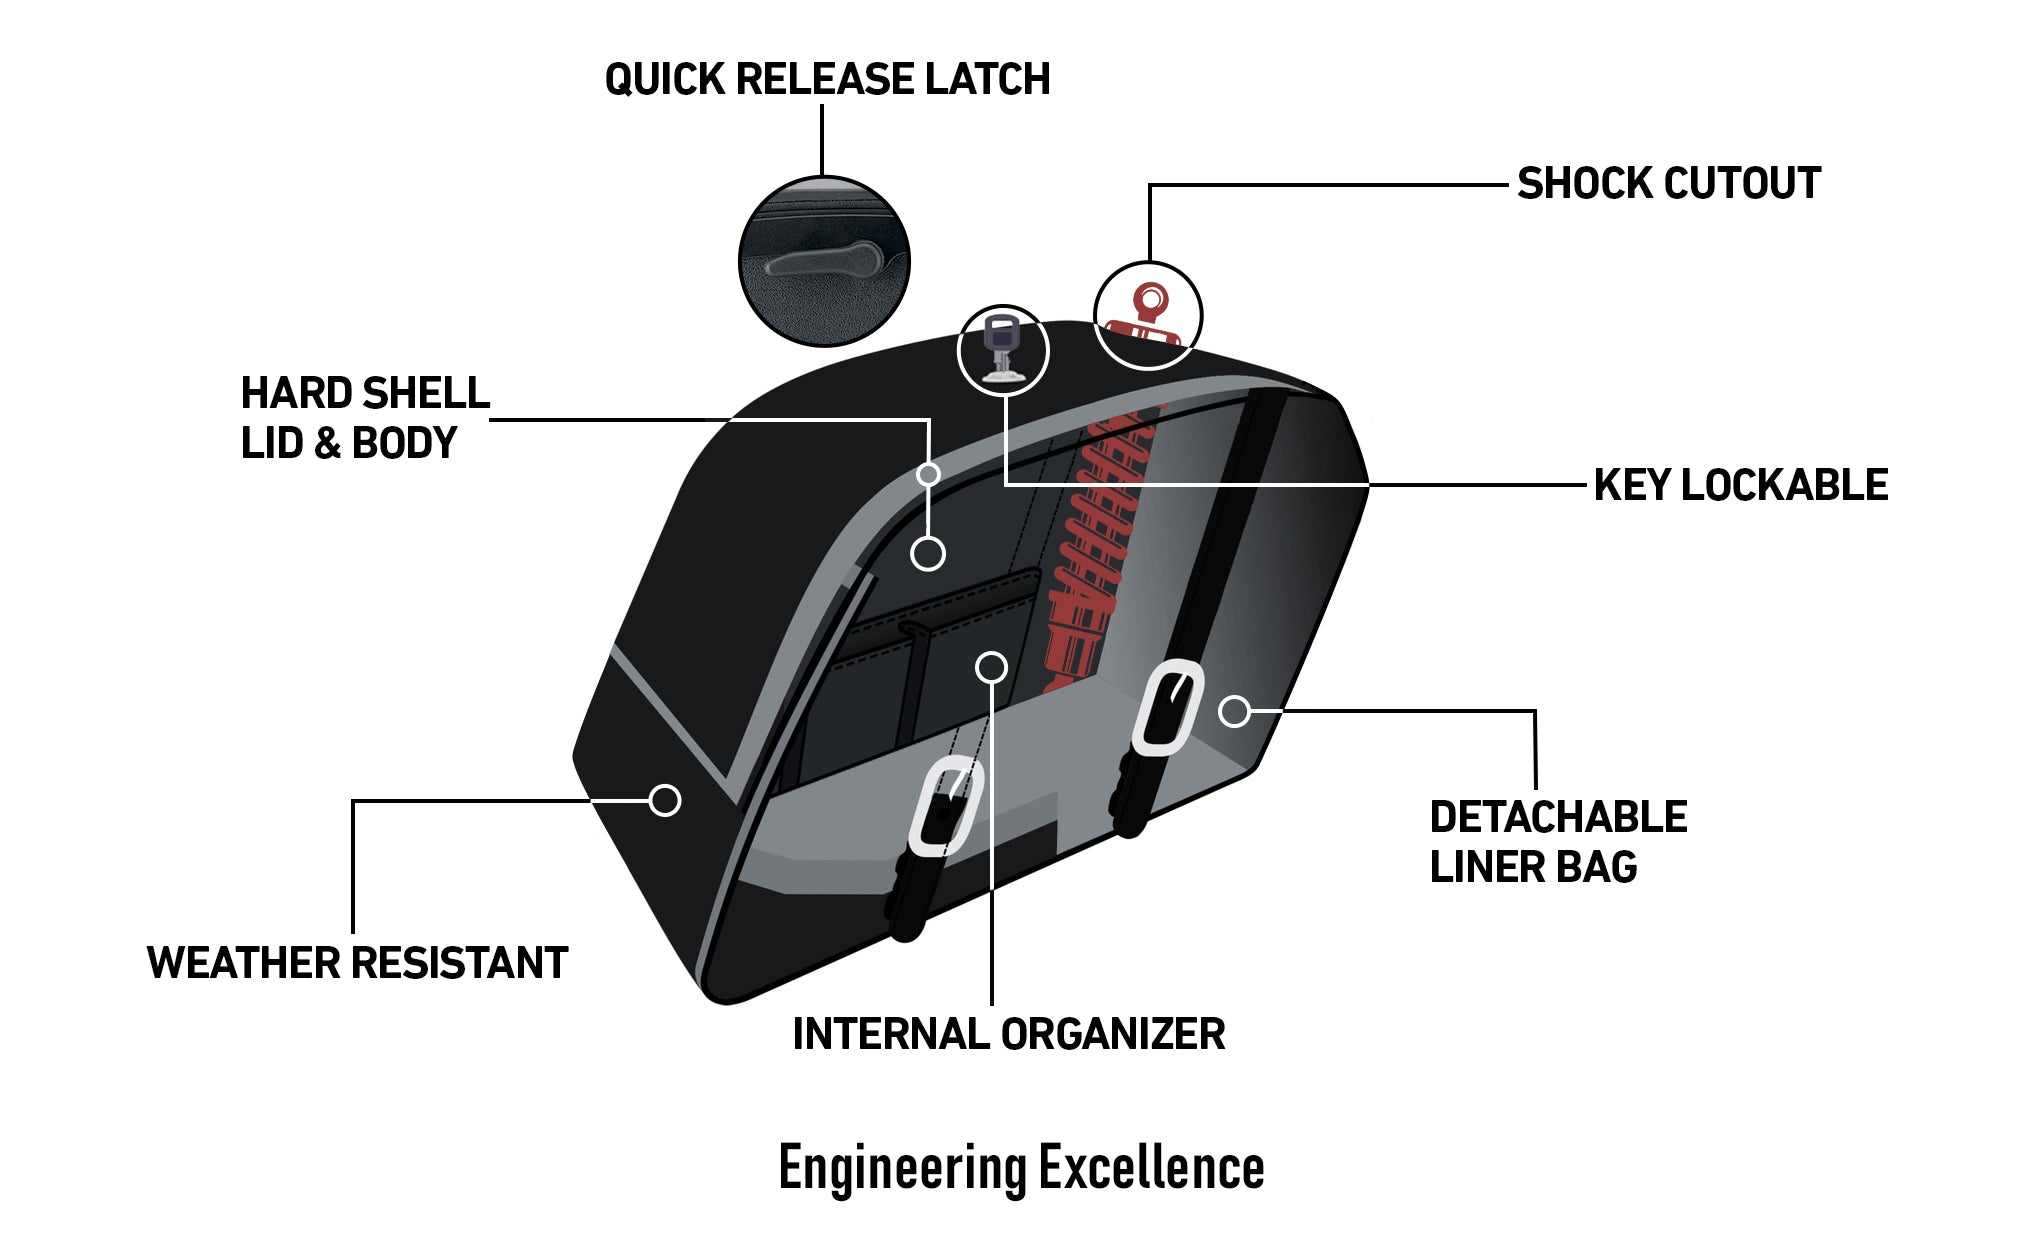 Viking Baldur Extra Large Shock Cut Out Painted Motorcycle Hard Saddlebags For Harley Dyna Low Rider Fxdl I Engineering Excellence with Bag on Bike @expand